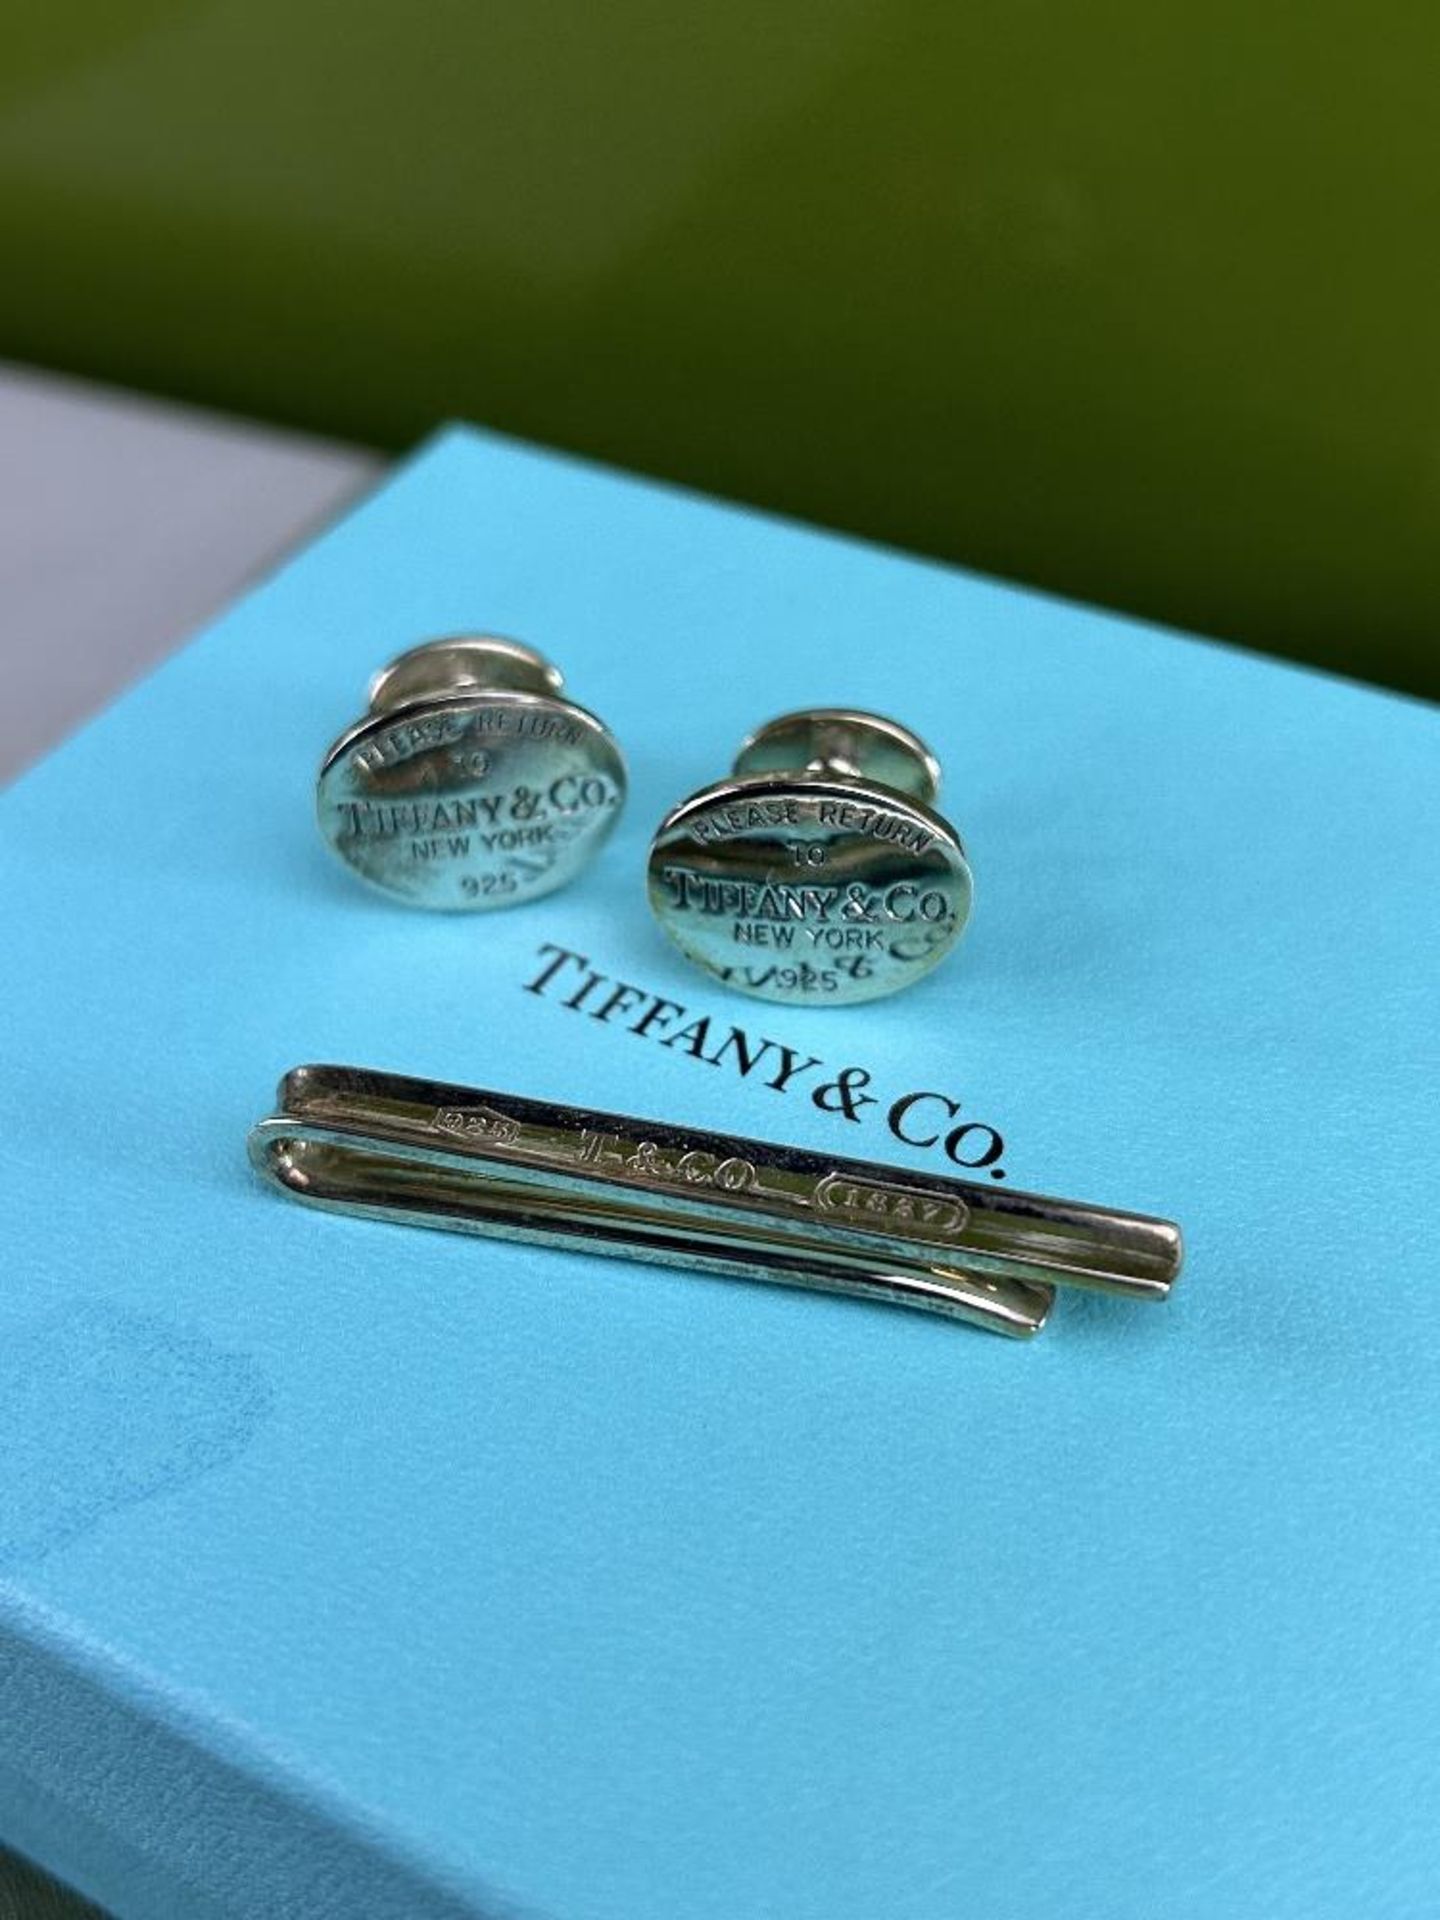 Tiffany & Co 925 Silver Cufflinks & Tie Pin Special Edition - Image 6 of 6